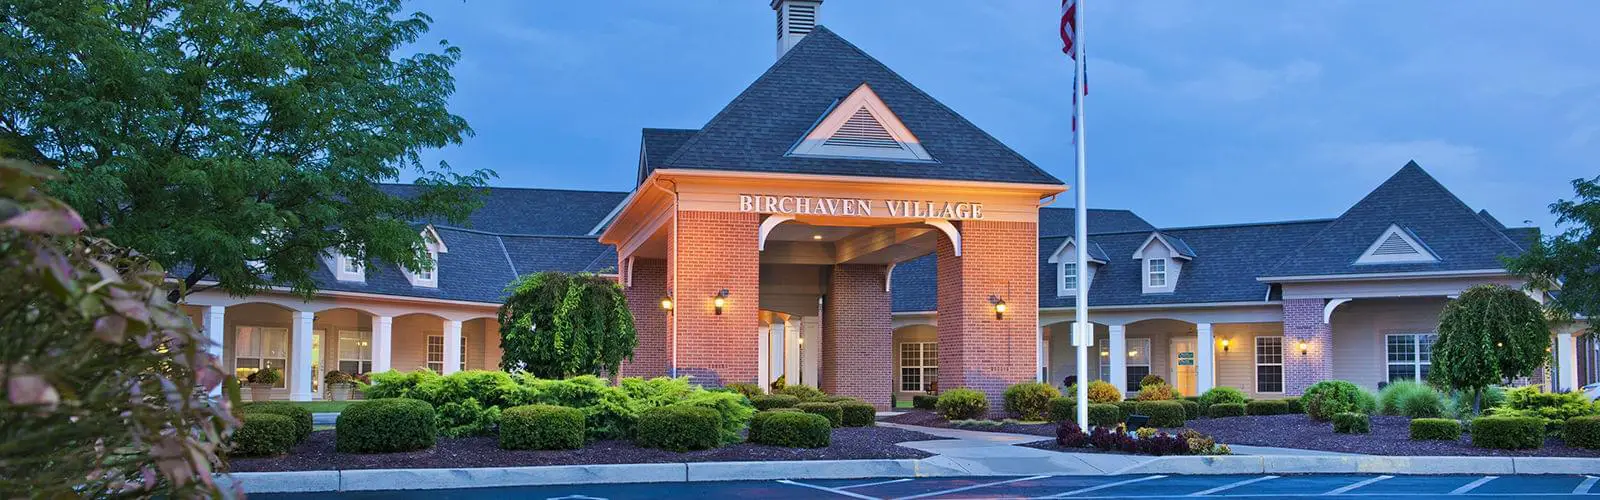 Photo of Birchaven Village Home, Assisted Living, Nursing Home, Independent Living, CCRC, Findlay, OH 1